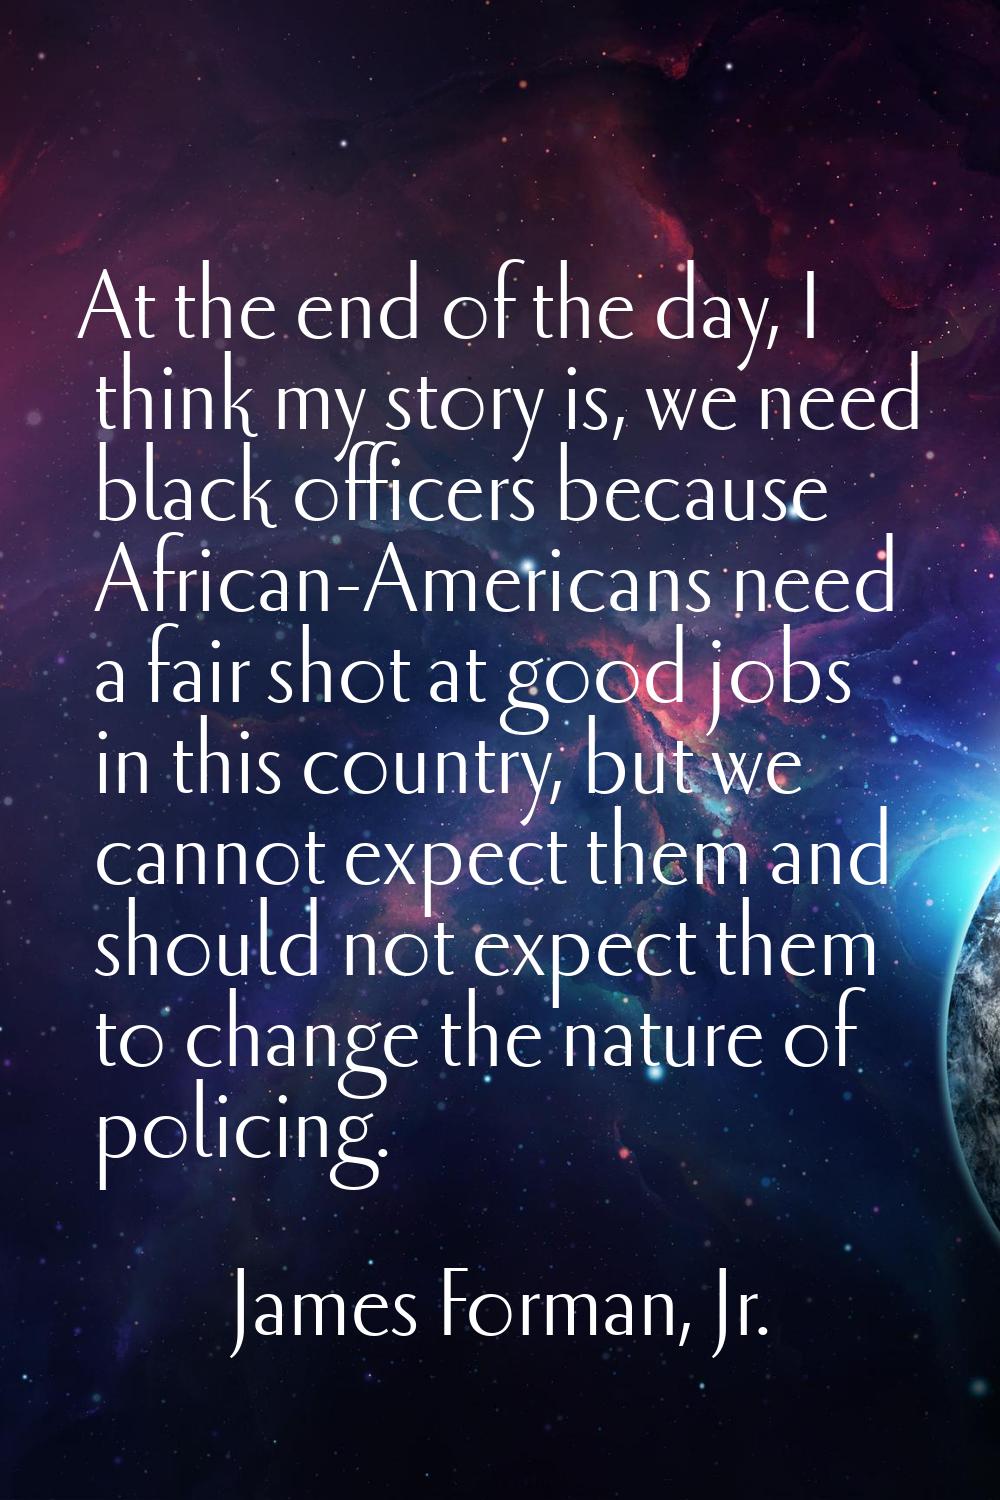 At the end of the day, I think my story is, we need black officers because African-Americans need a